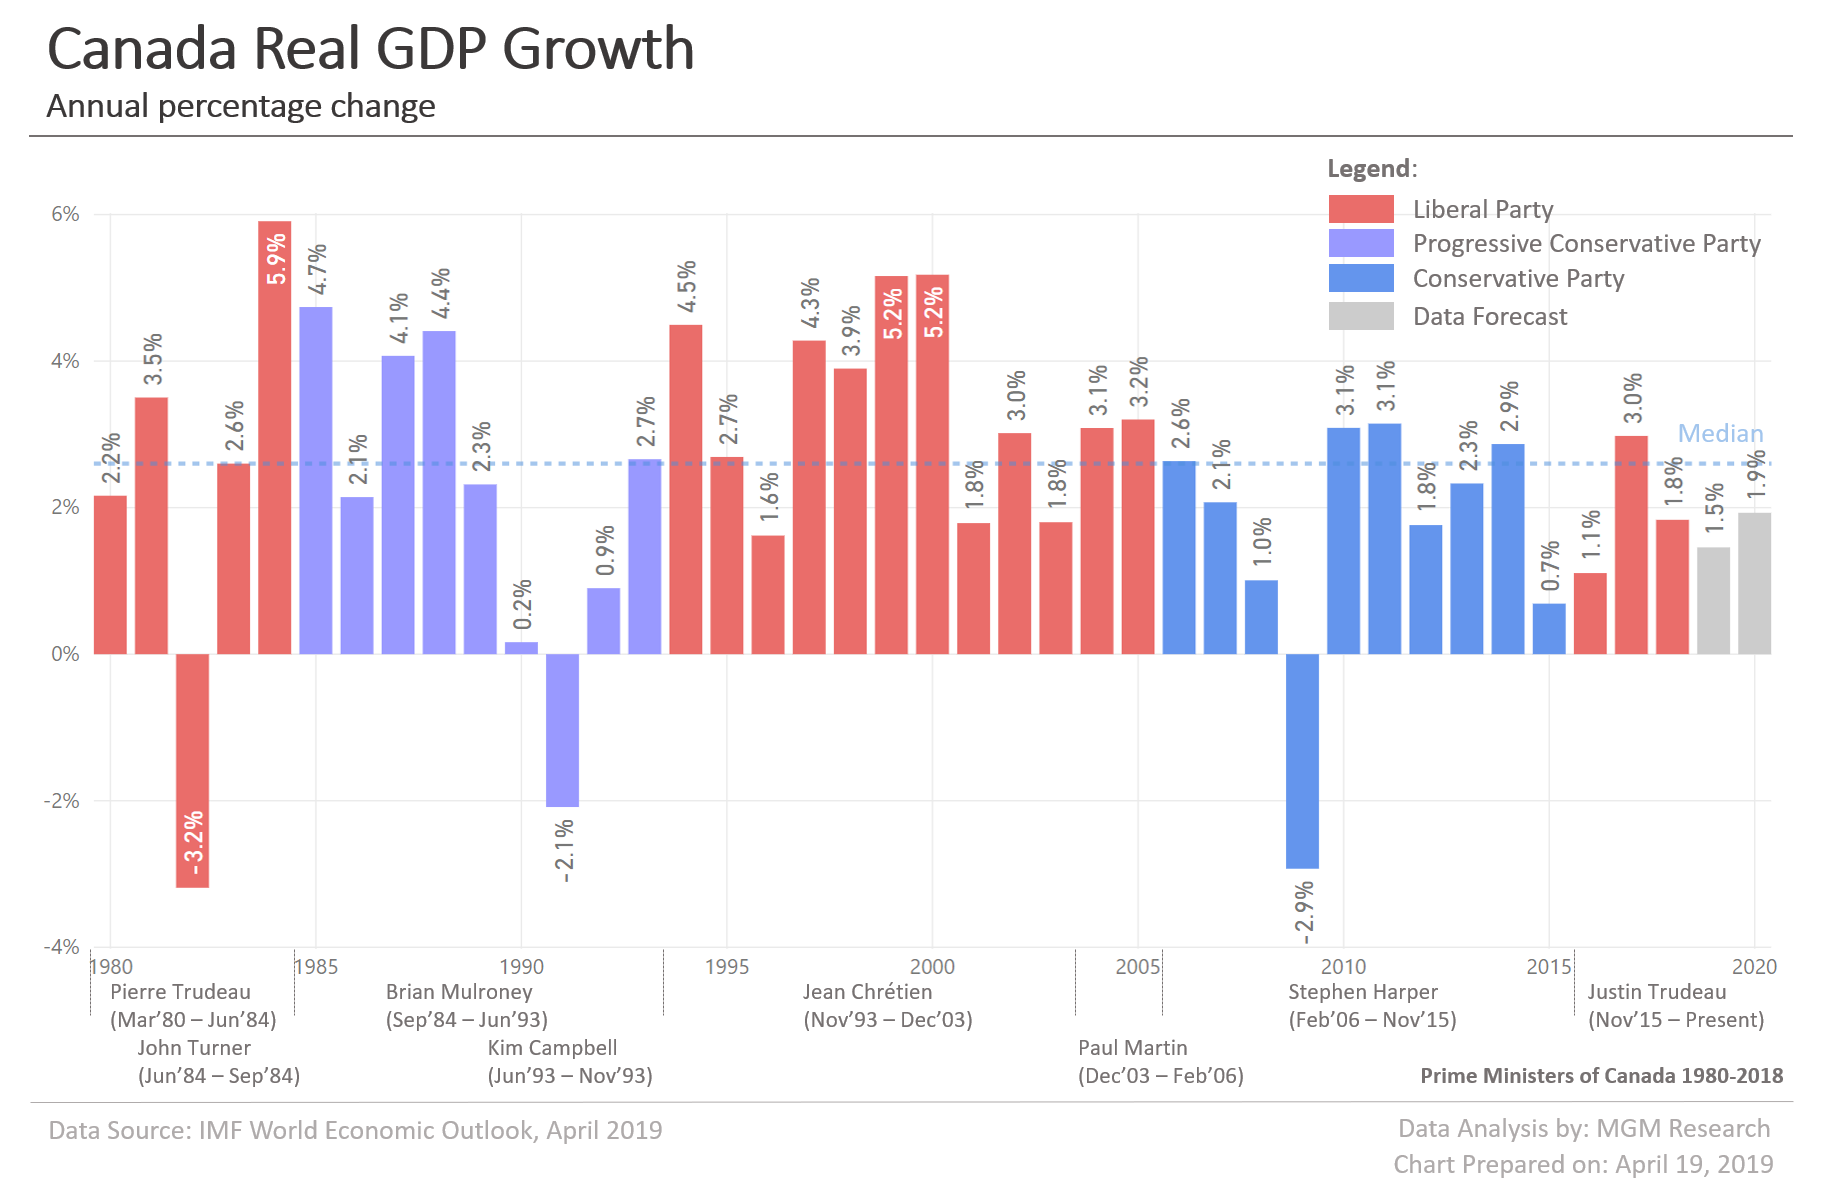 Canada Real GDP Growth 1980-2020